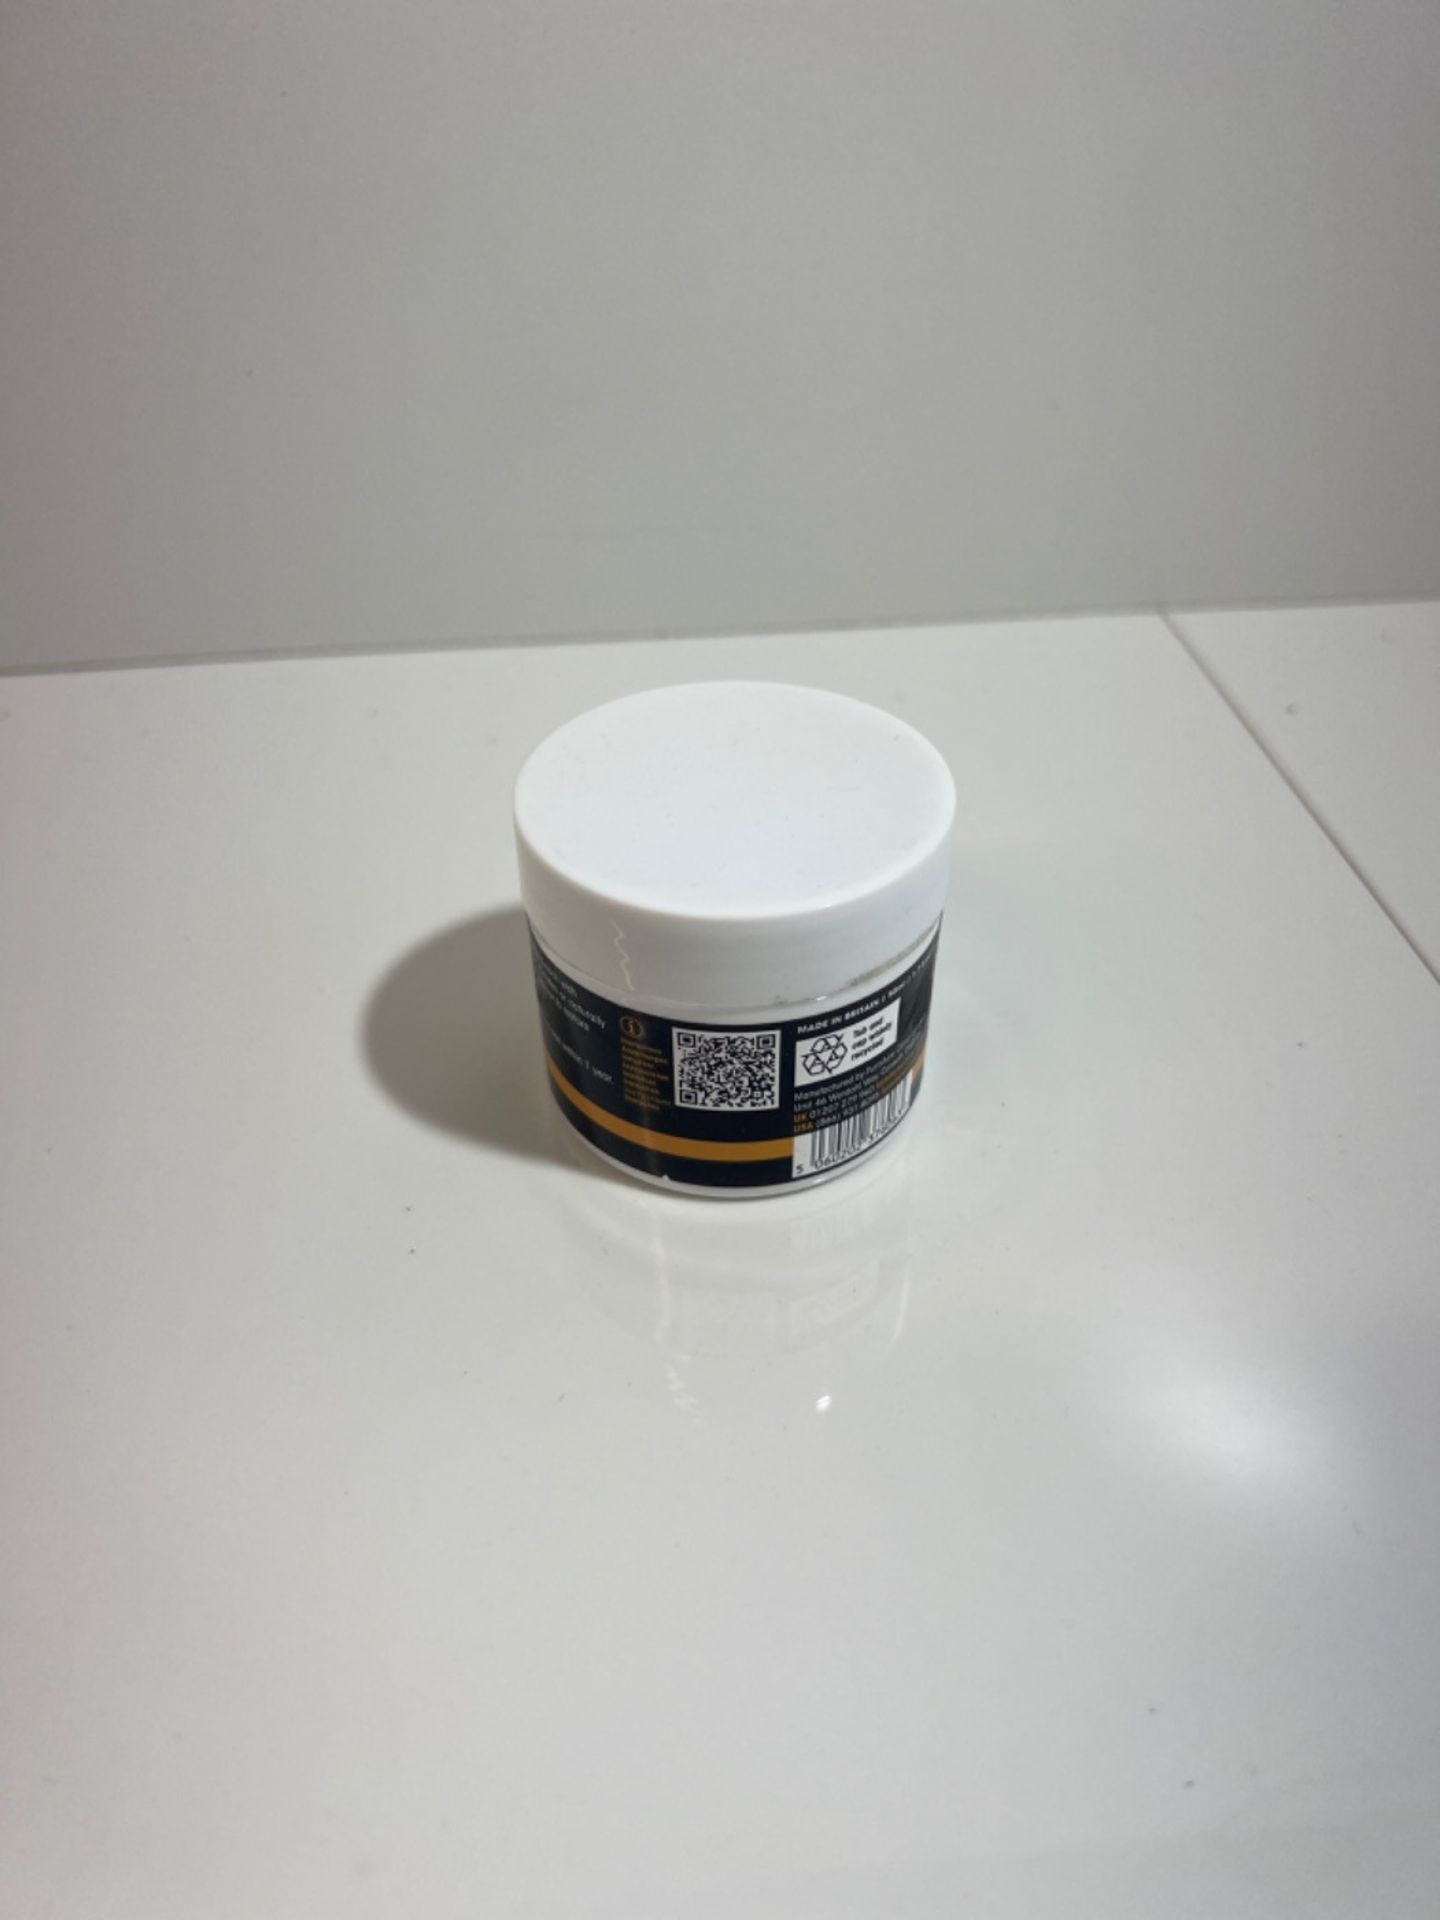 Leather Repair Filler (Black) - For Filling Holes, Scuffs, Scratches, Cracking Etc - Heavy Filler - - Image 3 of 3